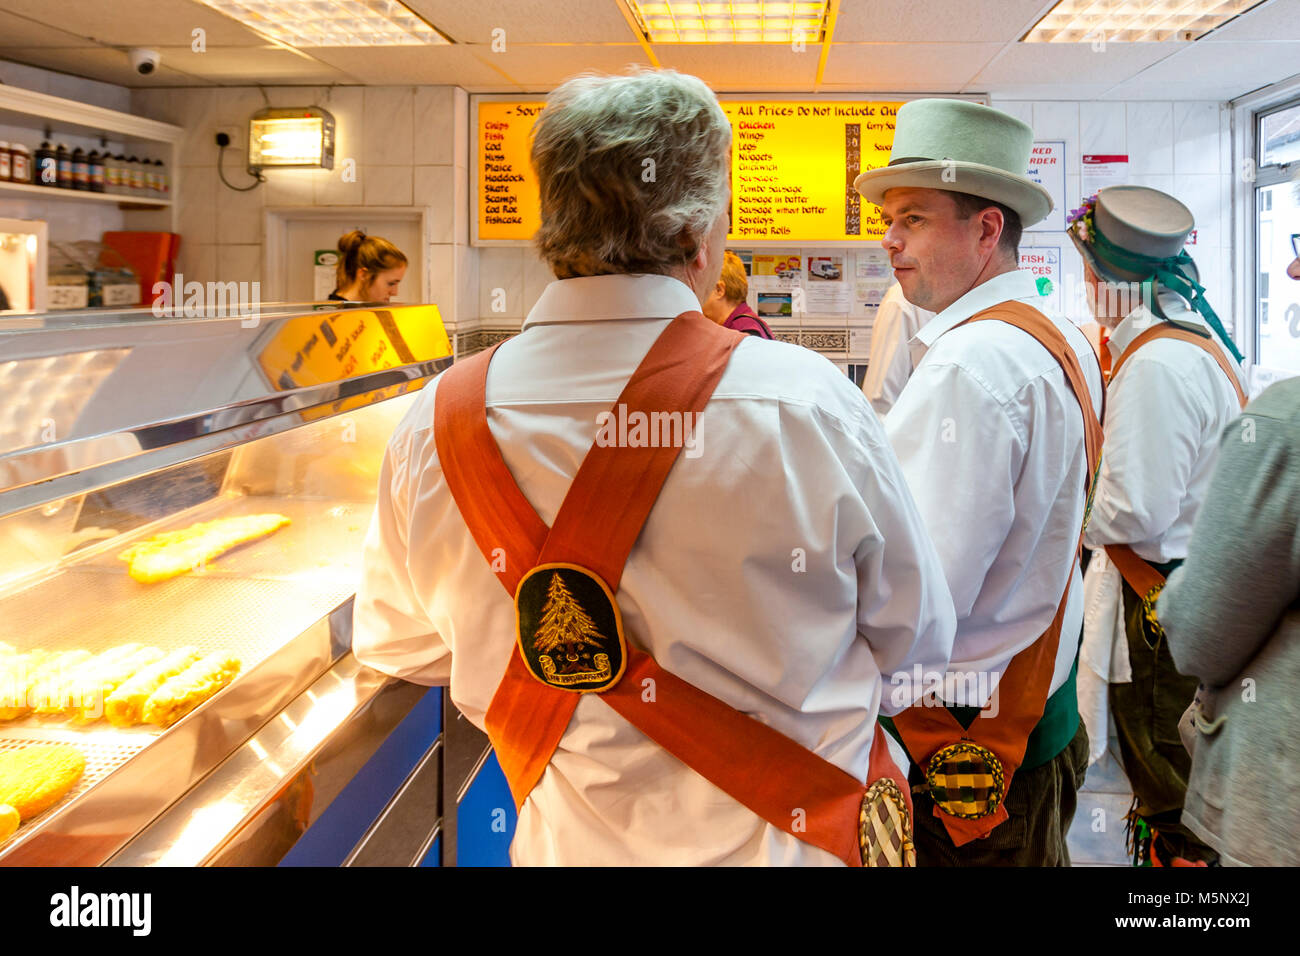 Morris Dancers Queue Up For Fish and Chips In A Lewes ‘Chippie’ Between Performances At The Lewes Folk Festival, Lewes, Sussex, UK Stock Photo